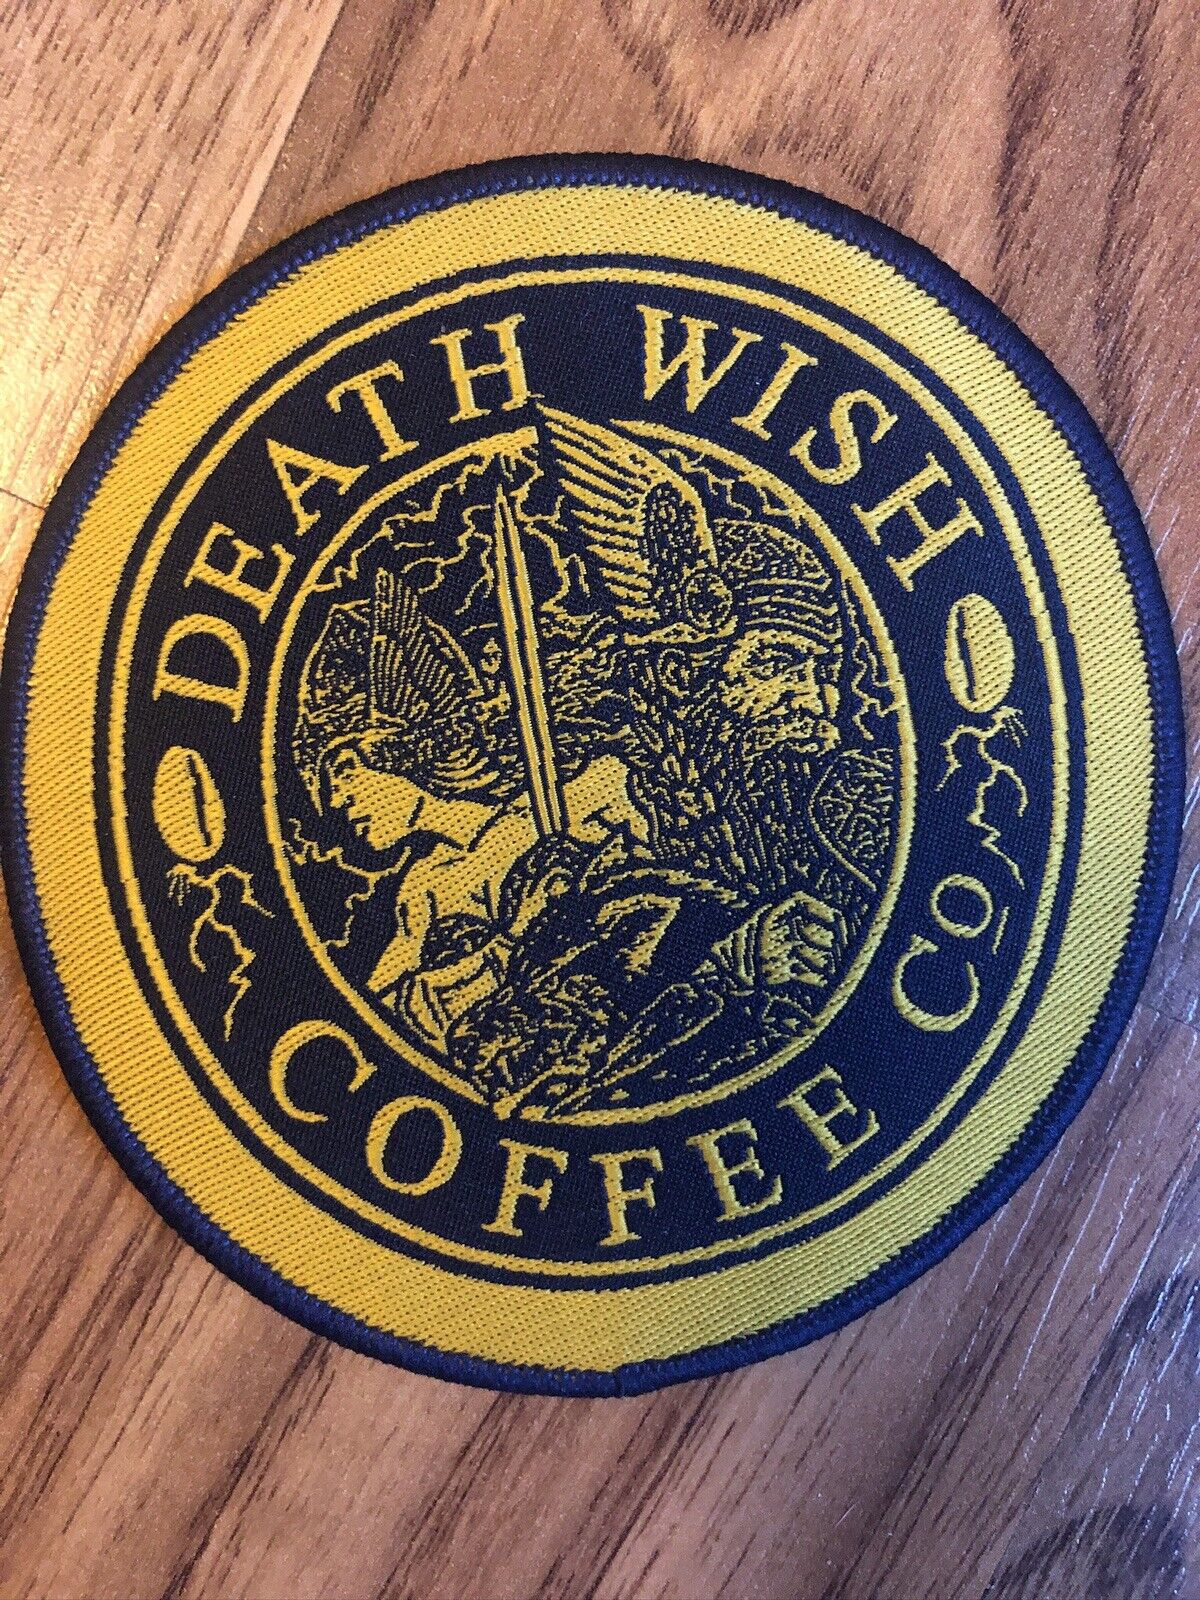 NEW DEATH WISH COFFEE OFFICIAL CLOTH PATCH THOR VALKYRIE VIKING VALHALLA  3.5\